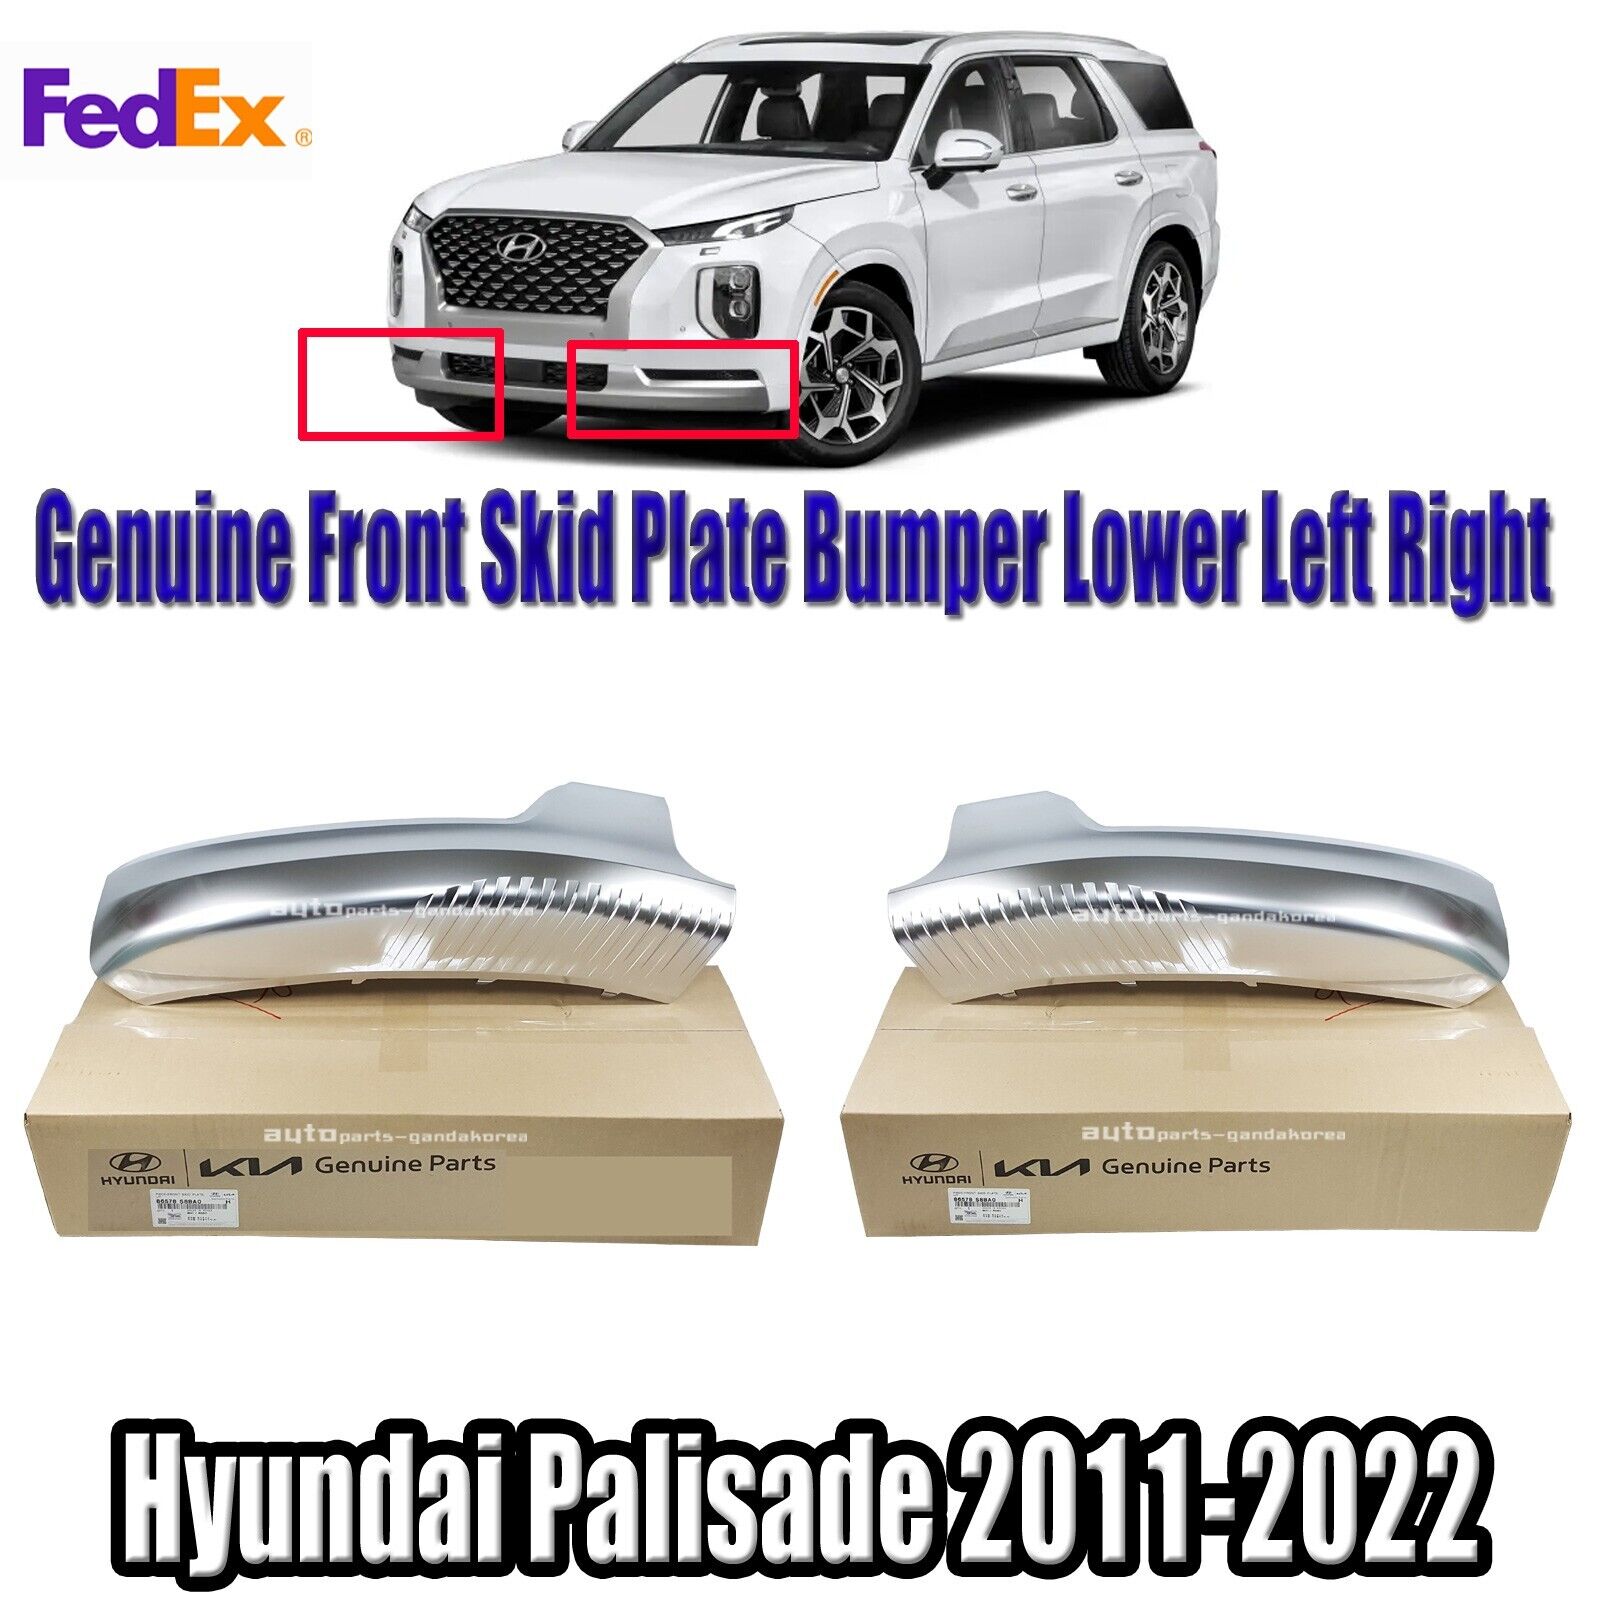 Genuine Front Skid Plate Bumper Lower Left Right For Palisade Calligraphy 21-22